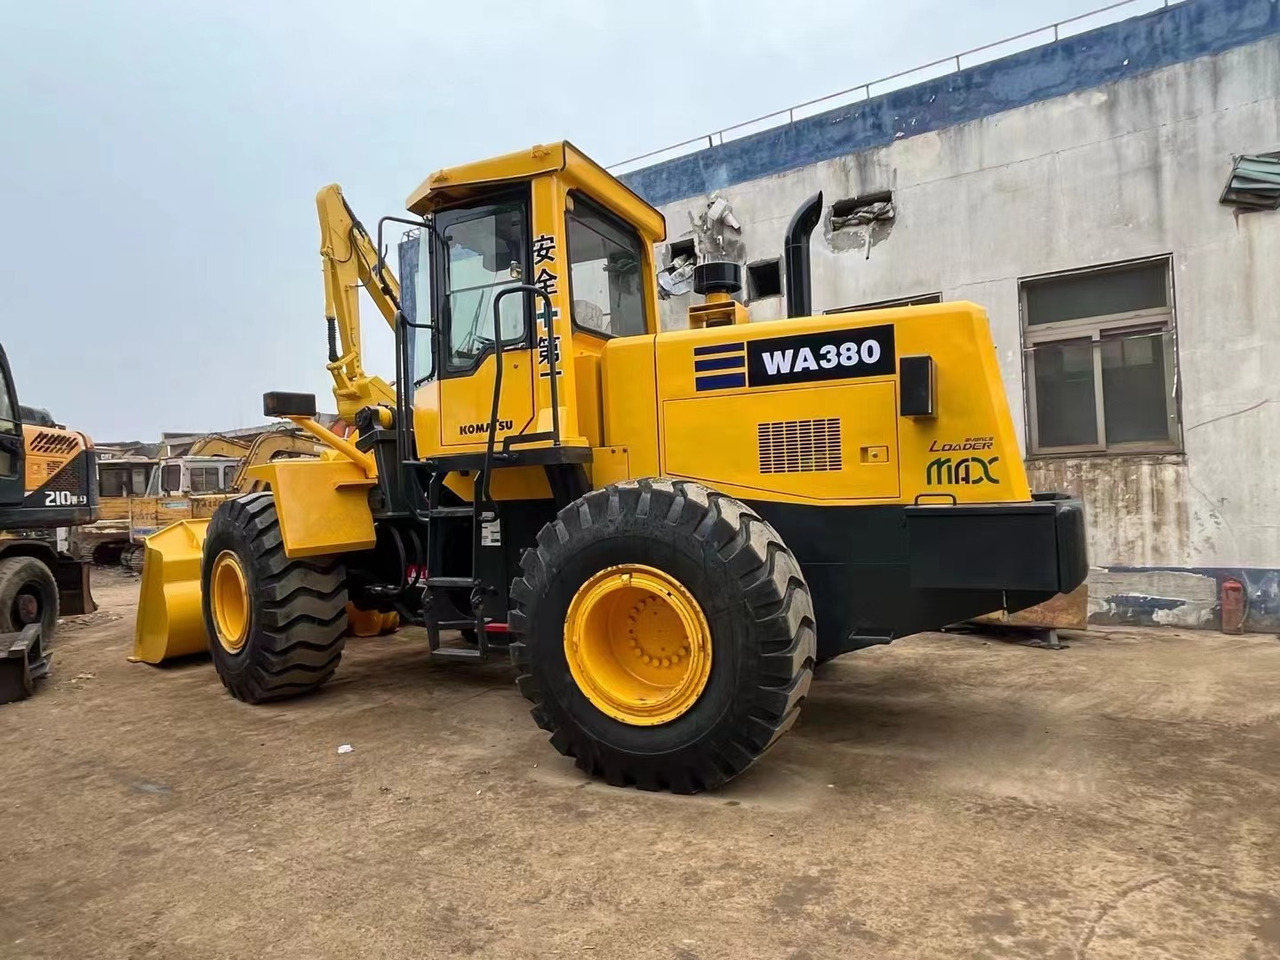 Wiellader KOMATSU WA380 small Used Loader  for sale with cheap price: afbeelding 8